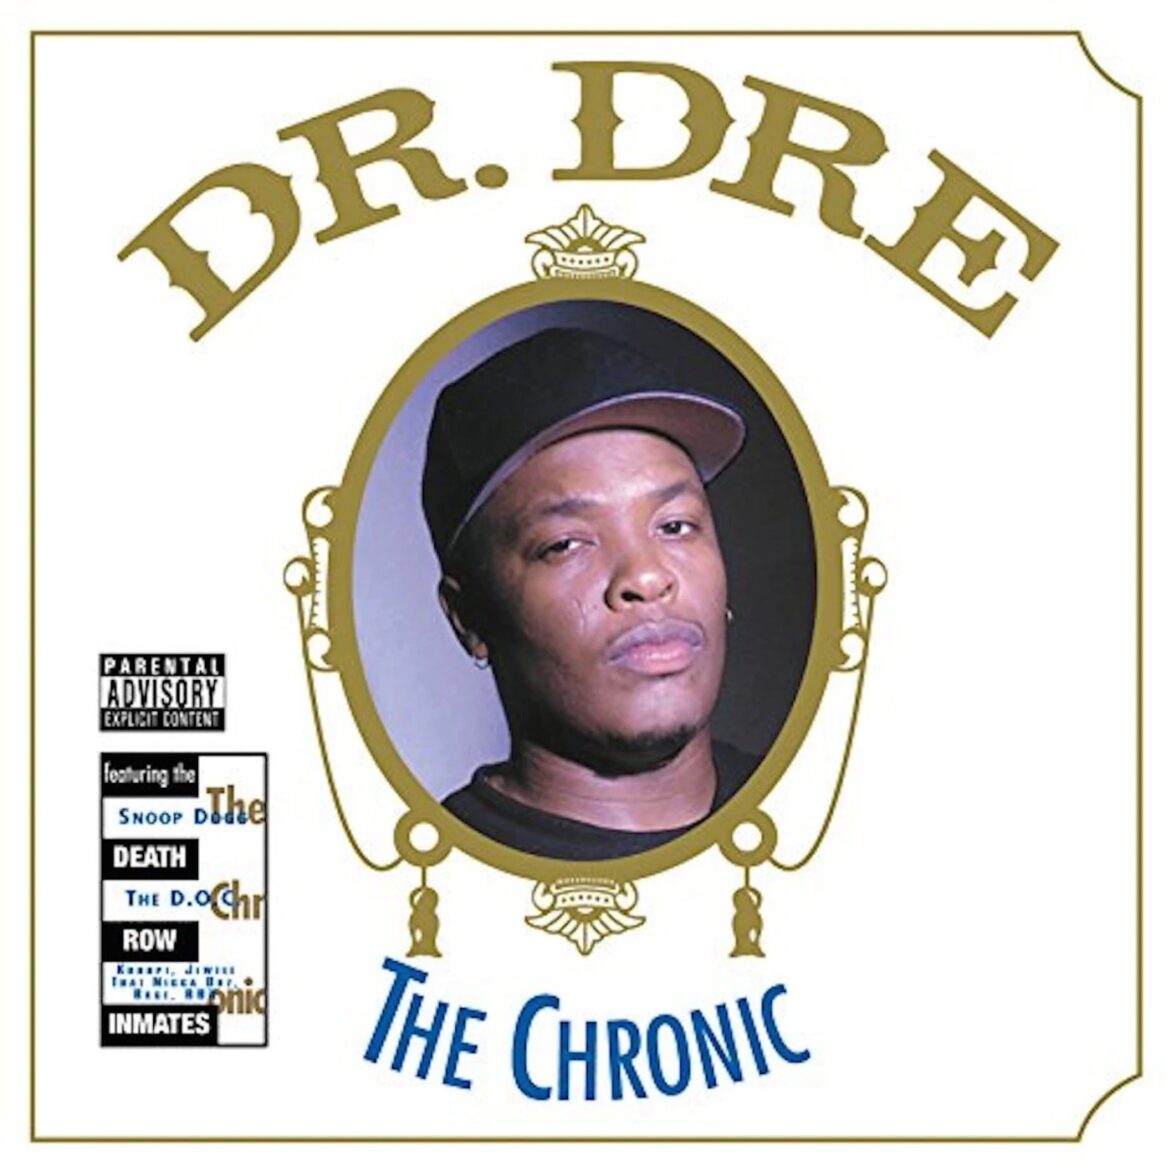 Black Podcasting - Dr. Dre: The Chronic (1992). "Welcome To Death Row..."